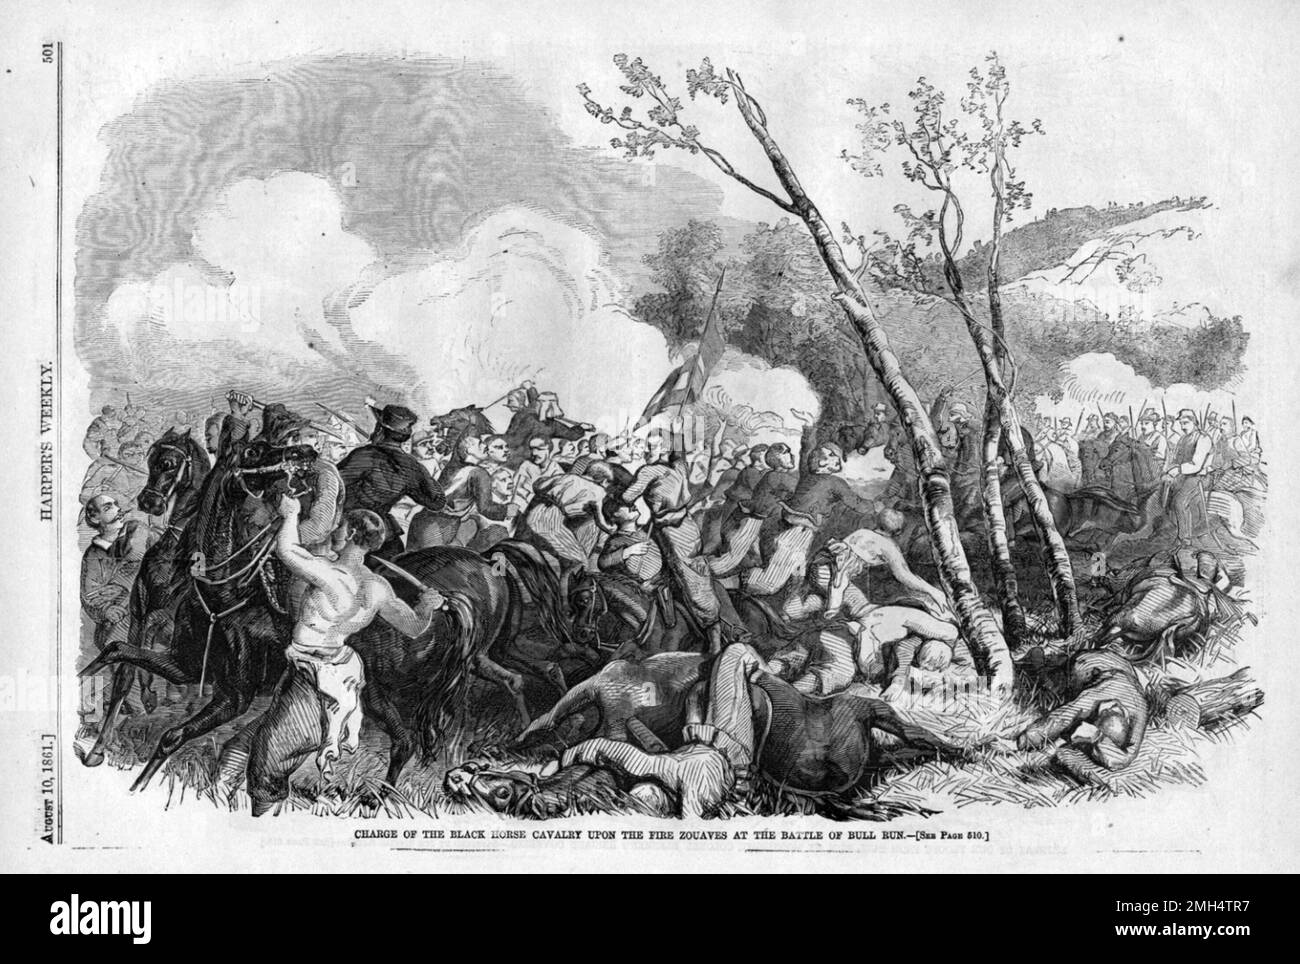 The First Battle of Bull Run (the name used by Union forces), also known as the Battle of First Manassas was the first major battle between the Unionist and Confederate forces during the American Civil War. It was fought on July 21, 1861 in West Virginia. It was won by the Confederate forces under Joseph Johnston and PGT Beauregard. It was at this battle that Thomas Jackson earnt his well known (and excellent) nickname Stonewall Kackson.Charge of the Black Horse Cavalry upon the Fire Zouaves at the Battle of Bull Run Stock Photo